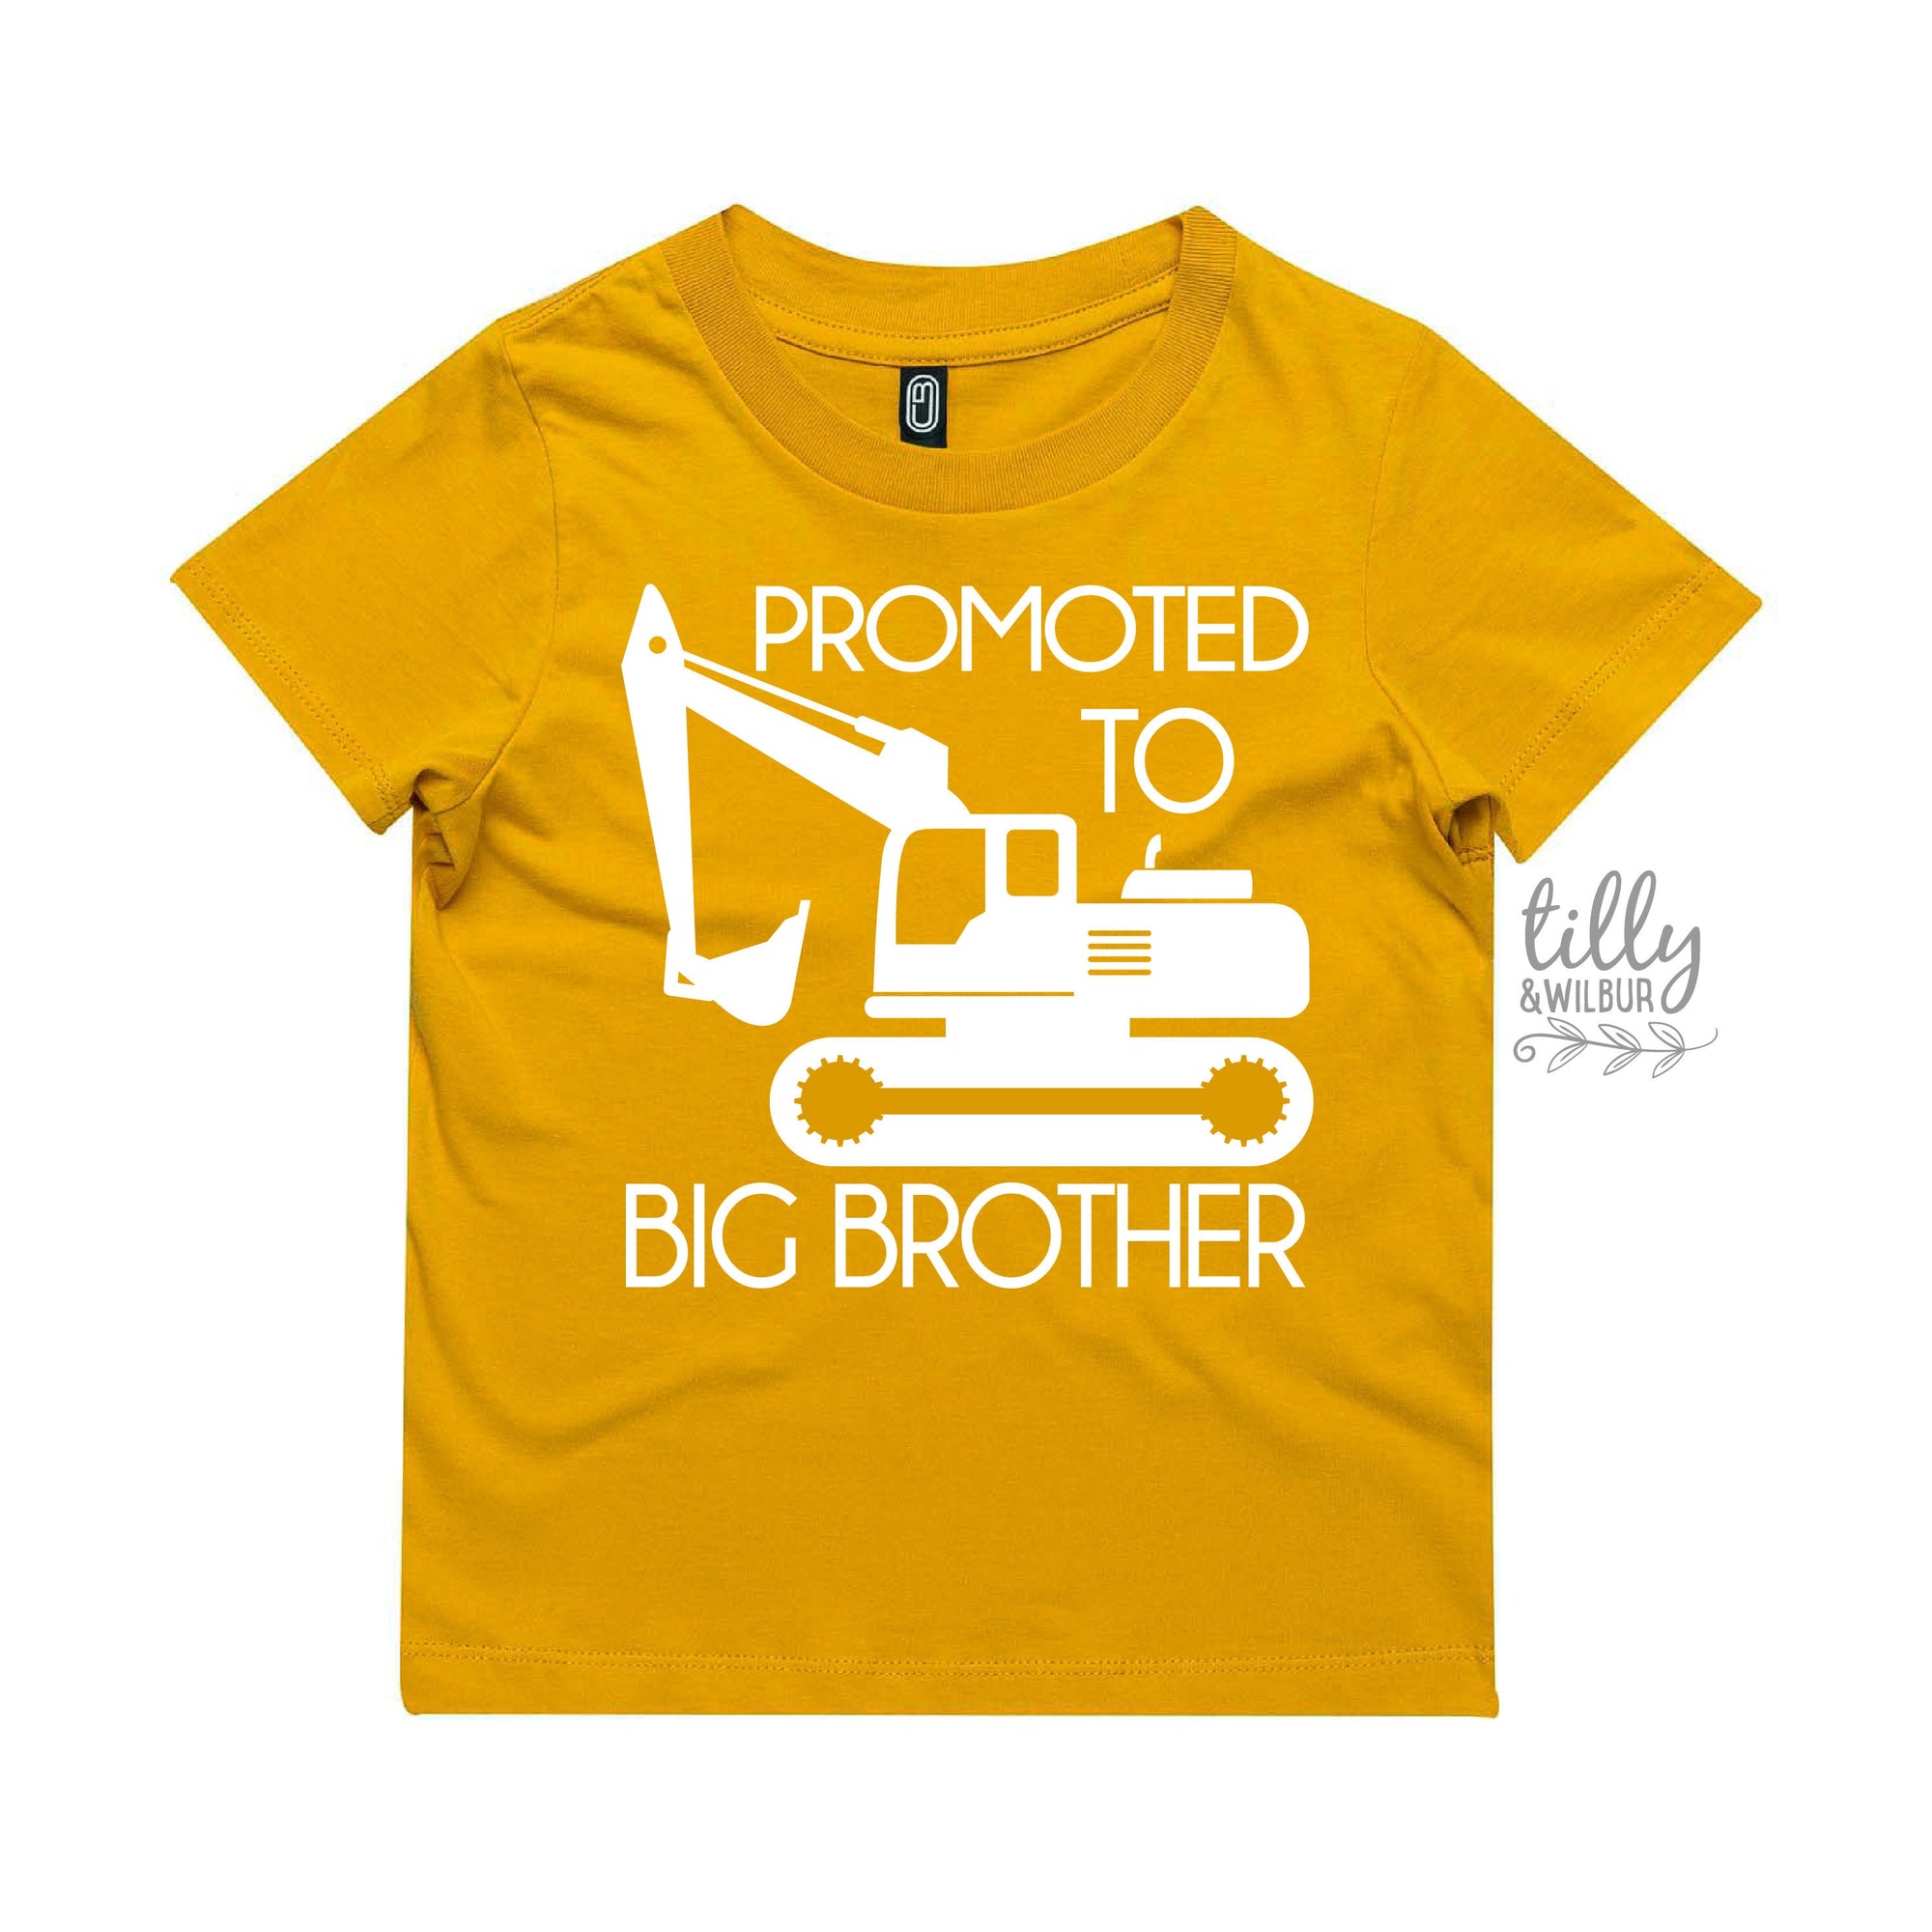 Big Brother T-Shirt, Promoted To Big Brother Shirt, Excavator T-Shirt, Digger T-Shirt, I'm Going To Be A Big Brother, Pregnancy Announcement